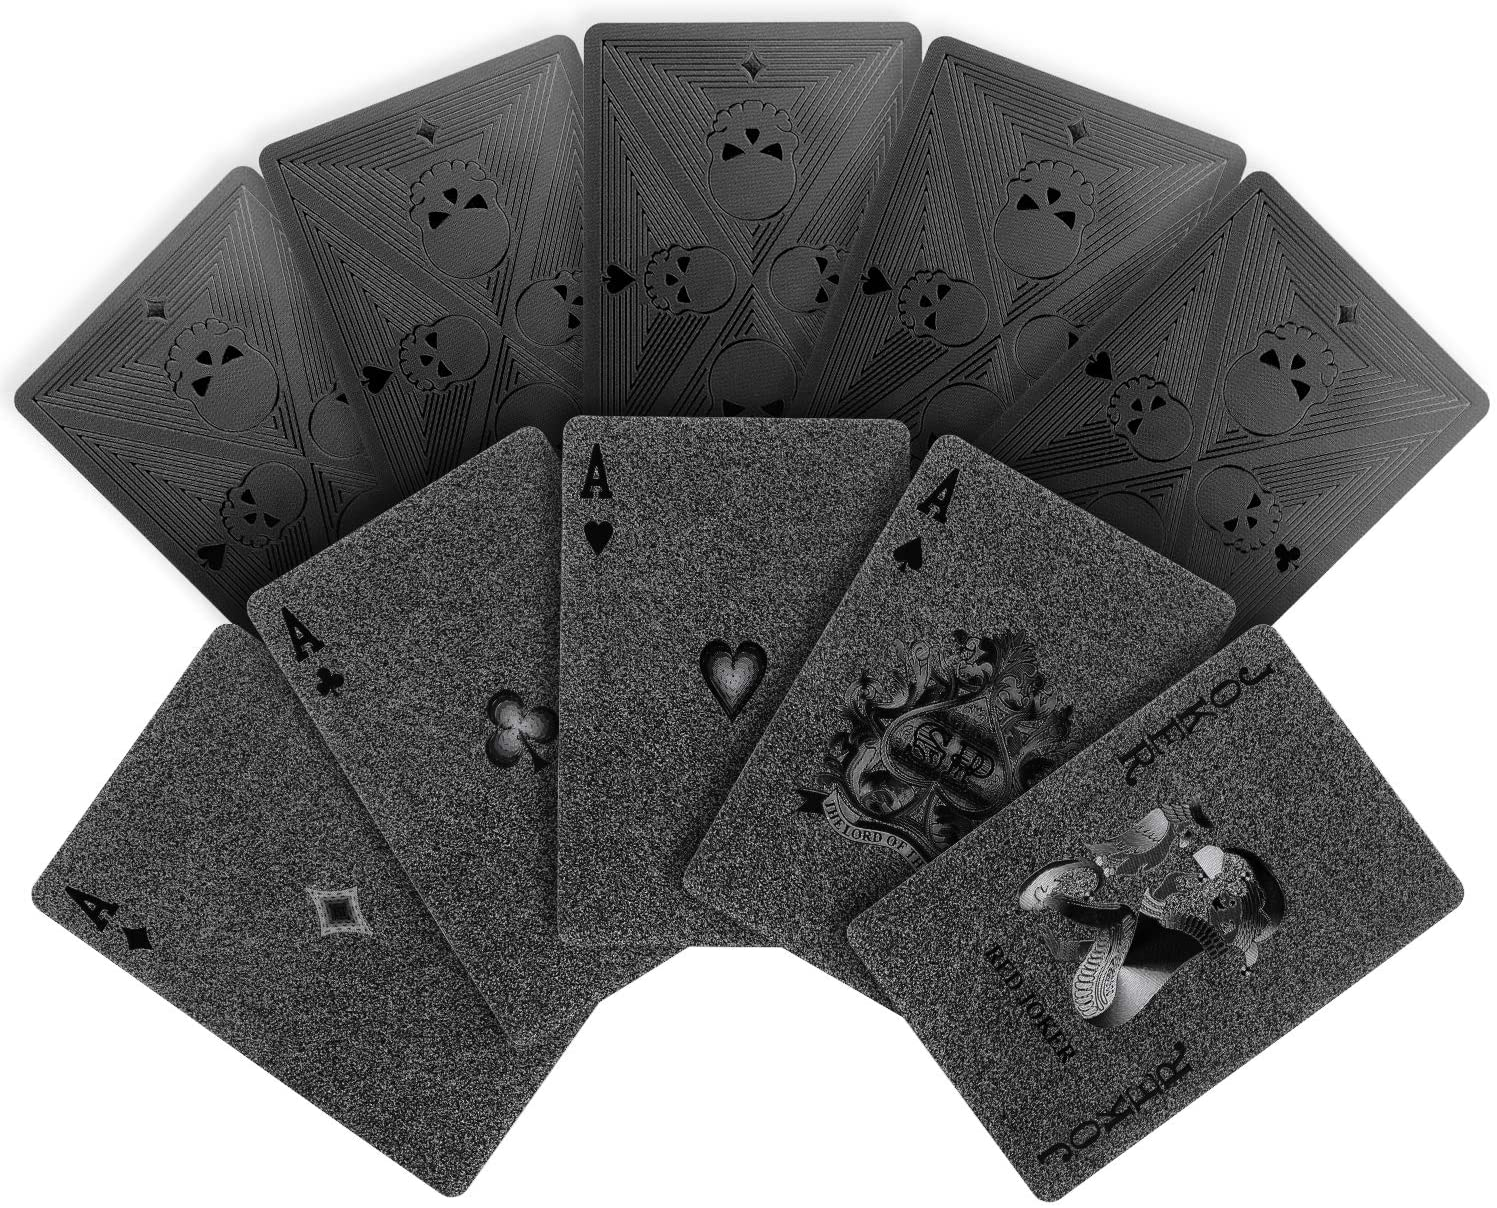 Cool Black Foil Poker Playing Cards, Waterproof Deck of Cards with Gift Box, Use for Party and Game